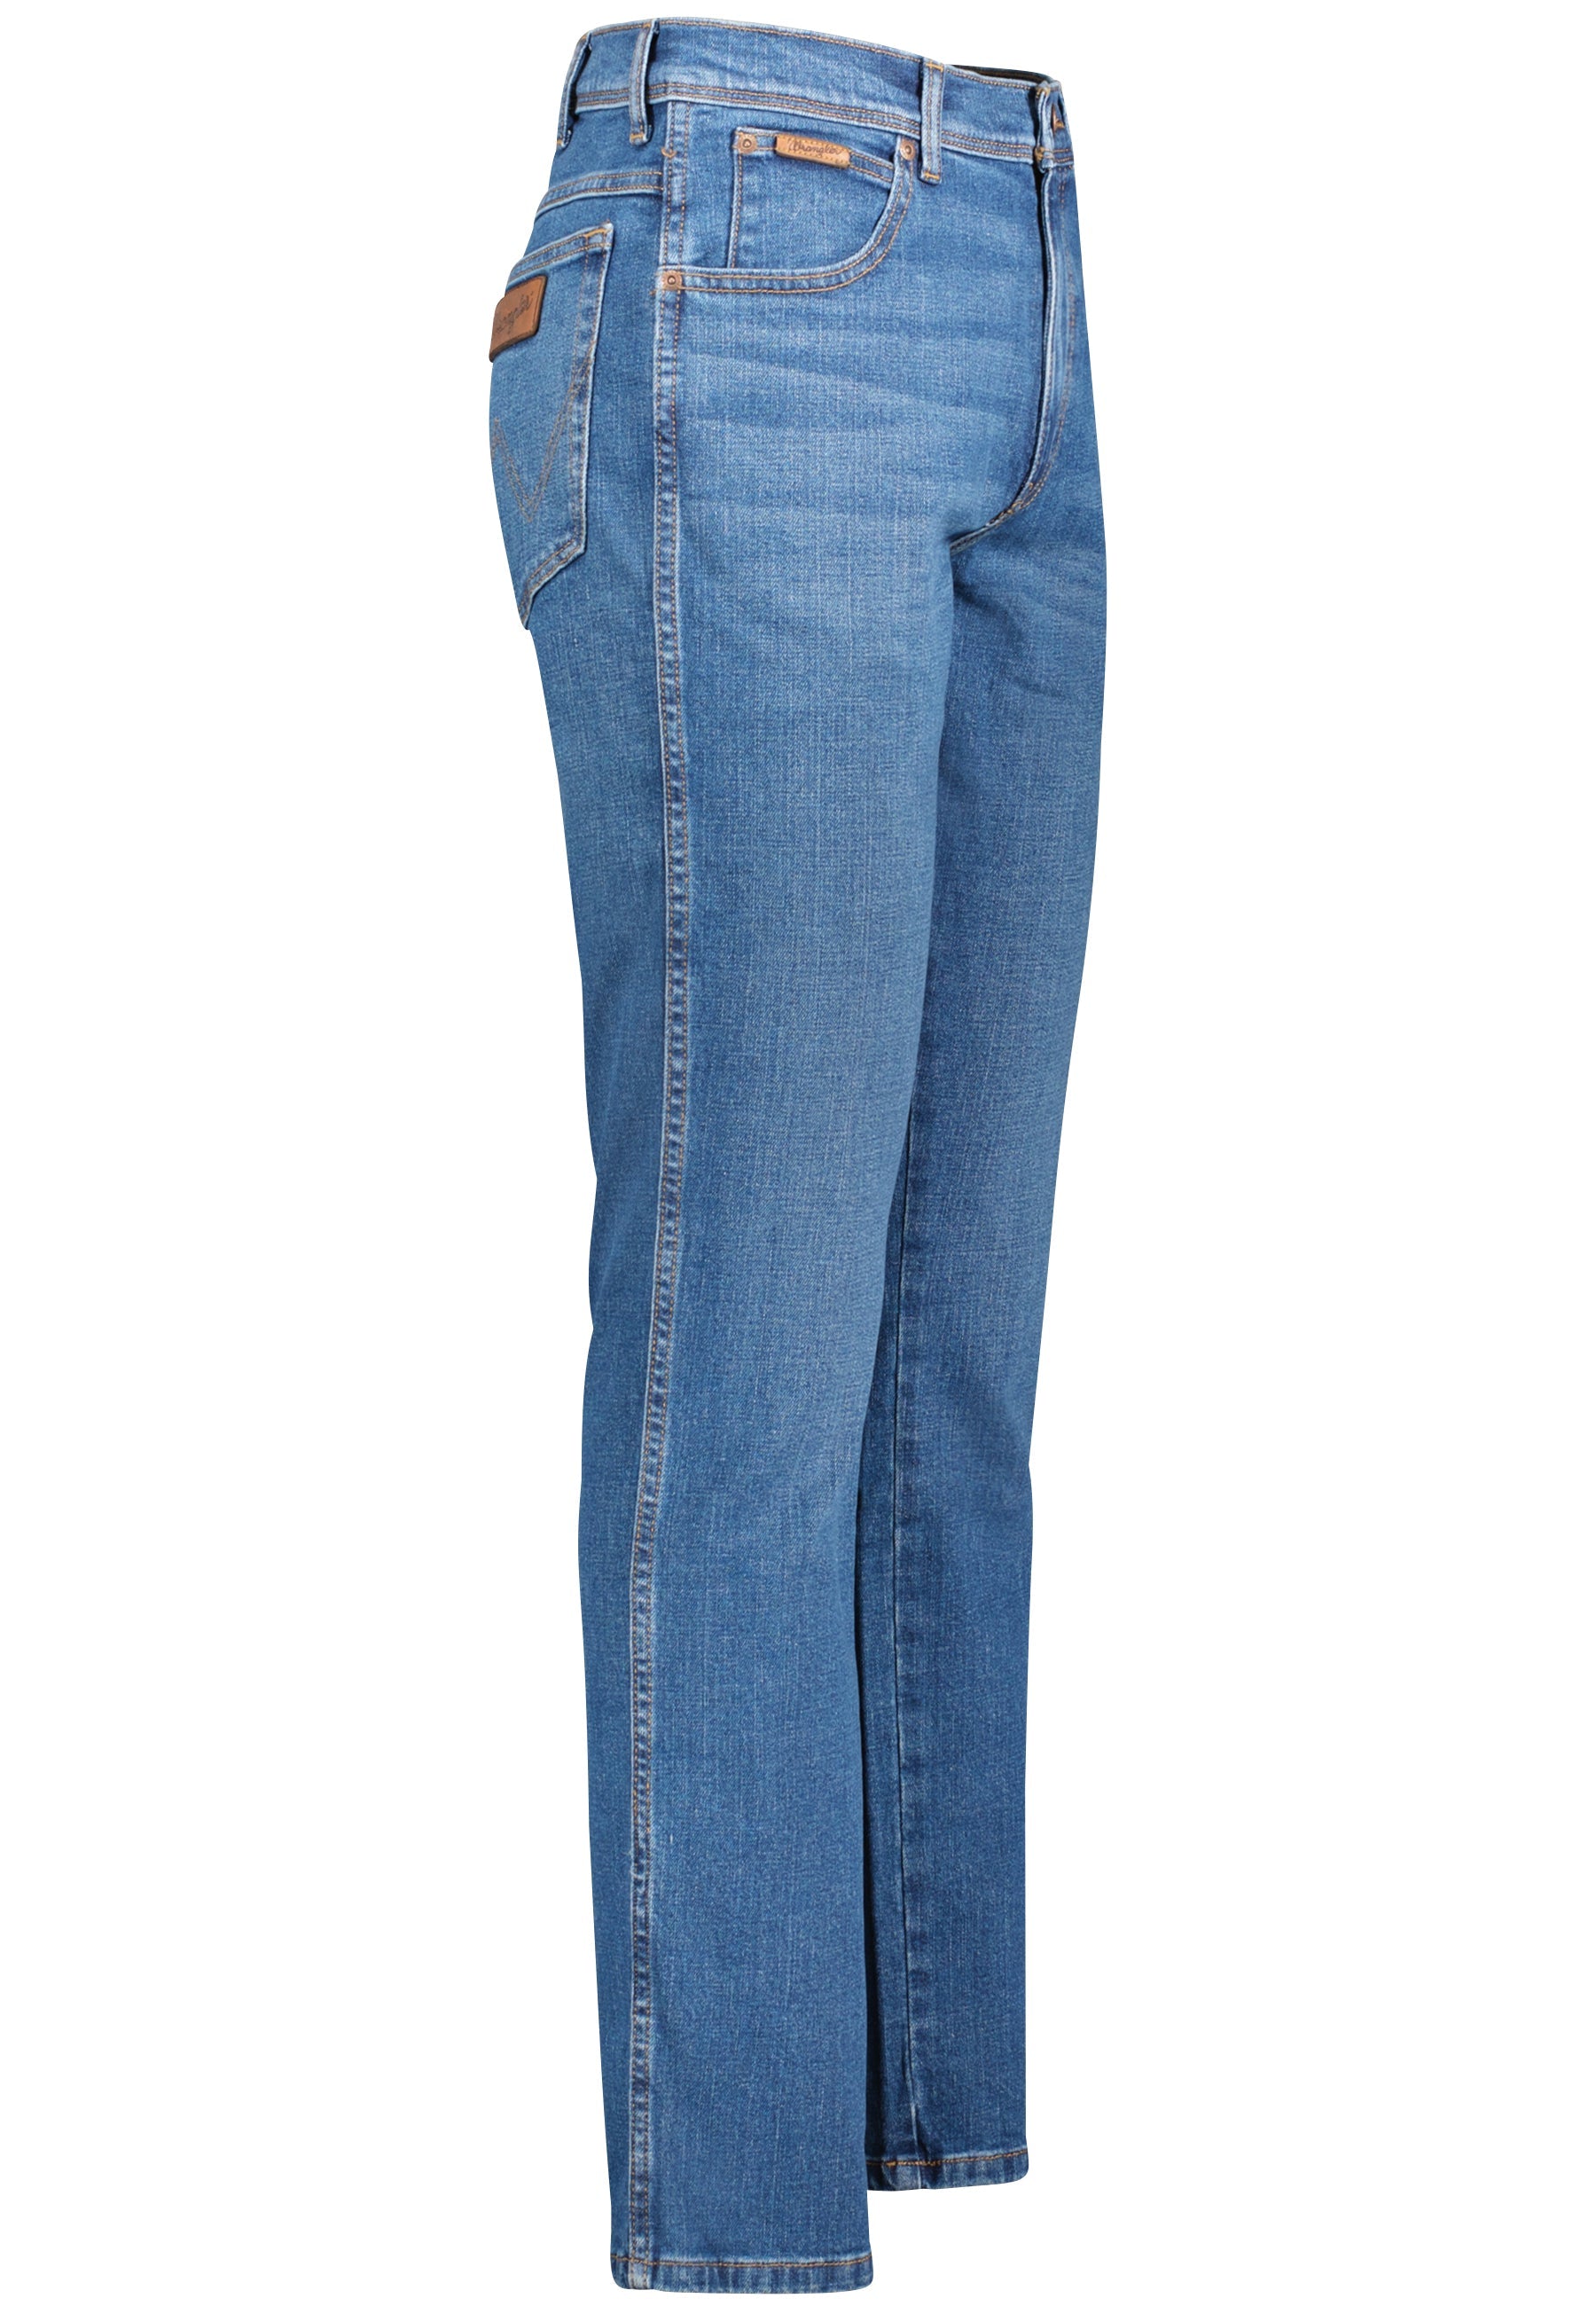 Texas Slim Low Stretch in Banging Jeans Wrangler   